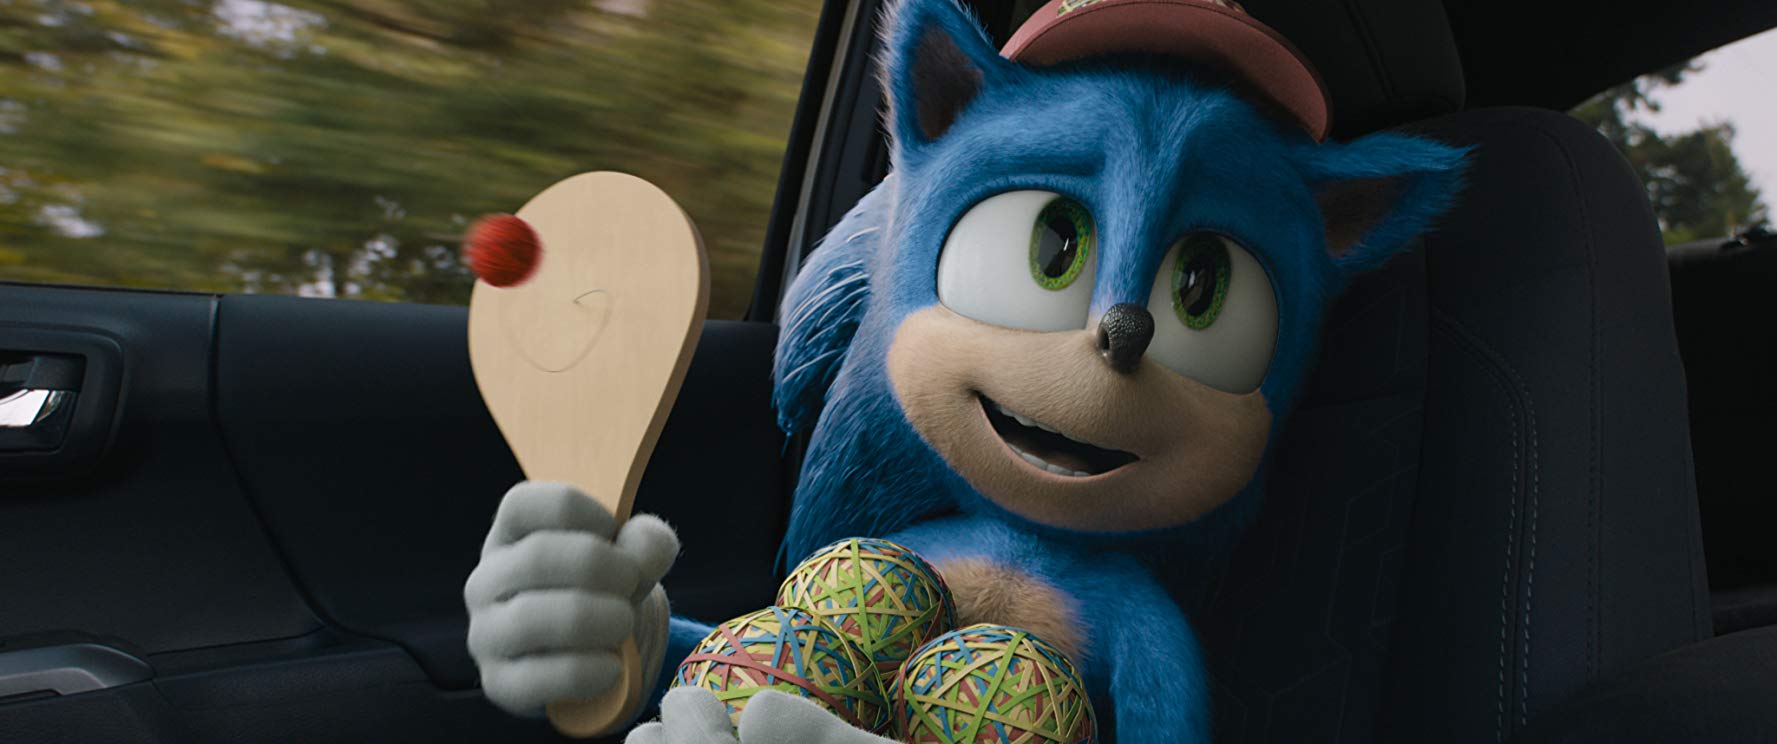 Sonic the Hedgehog movie, PG rating